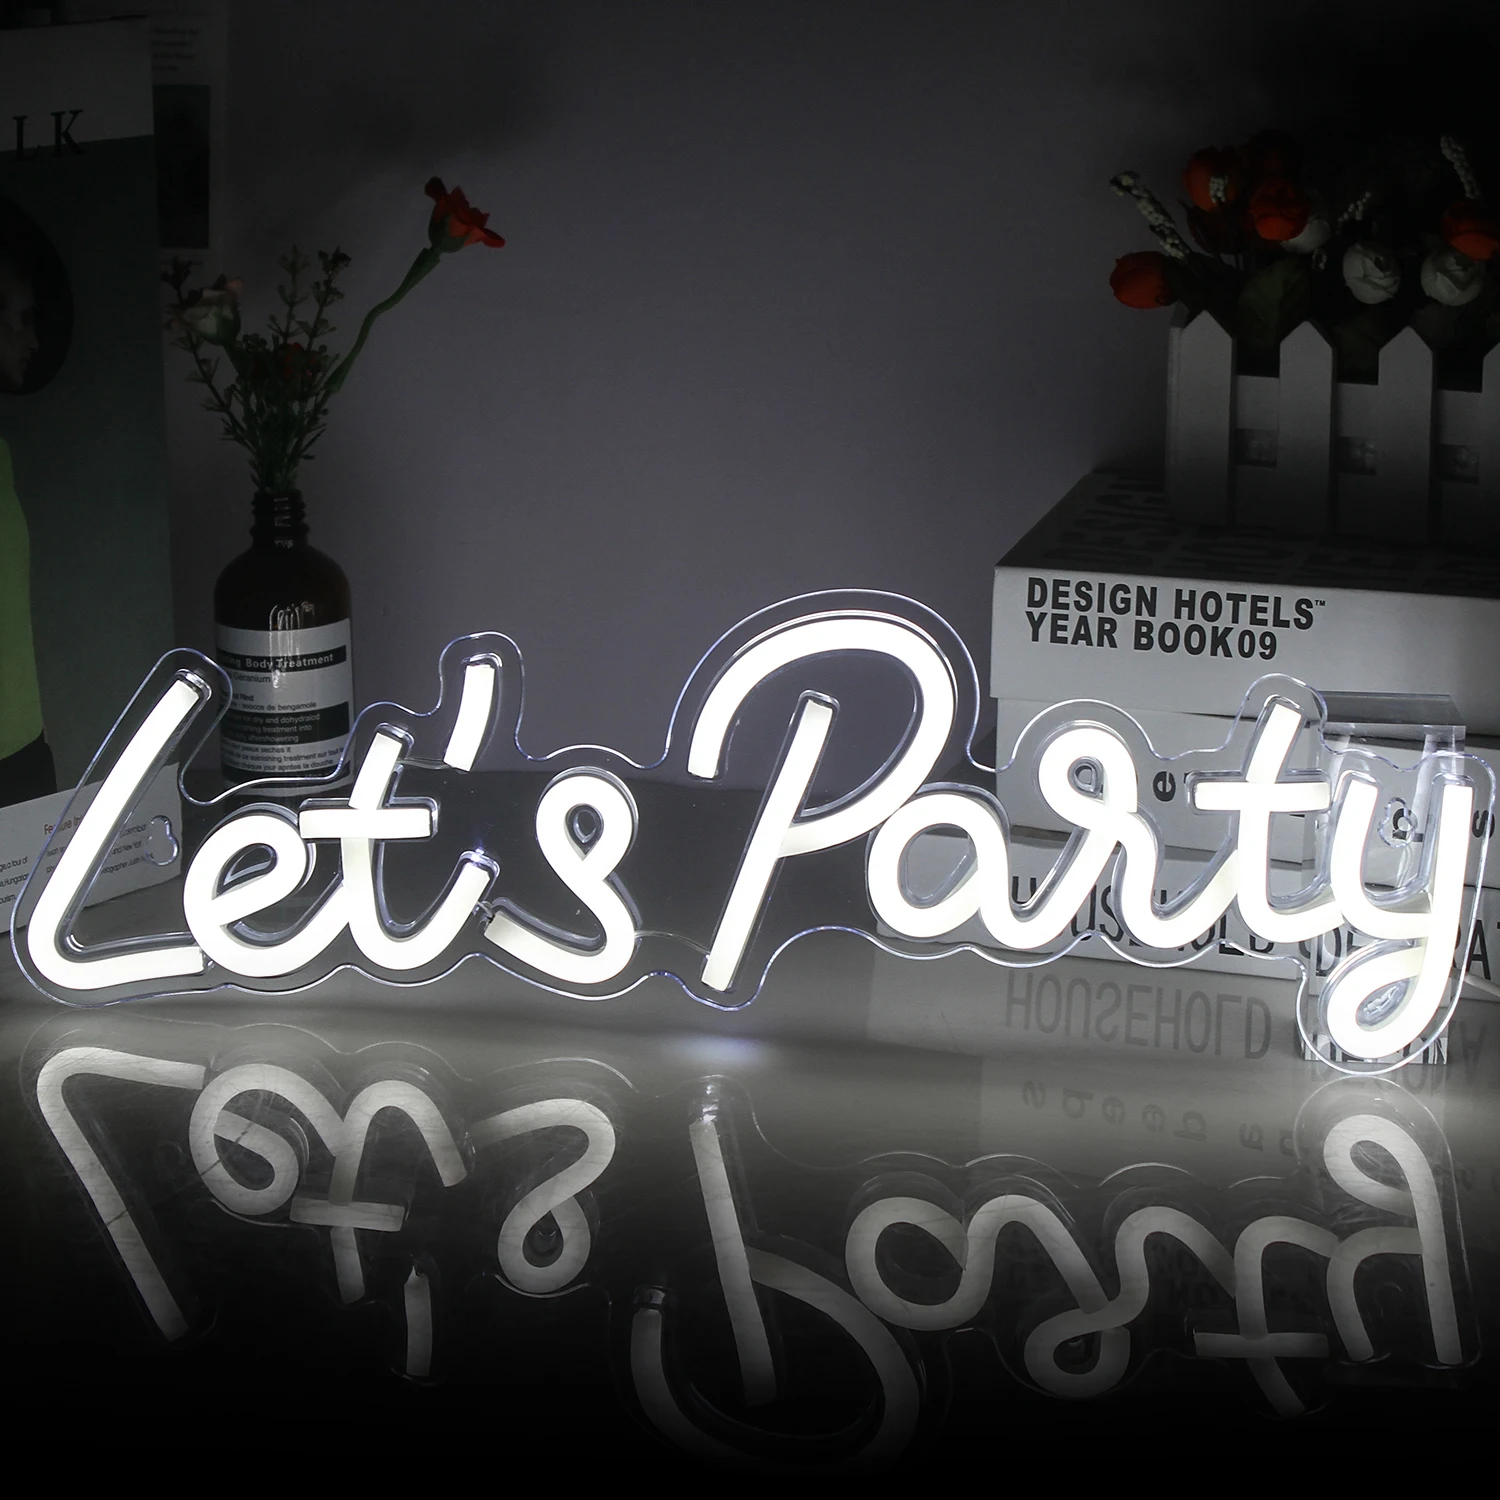 Party ART Neon light Customize LED Sign USB Connected Decorative Room Bar Pub Store Club Garage Home Personality Wall Decorat